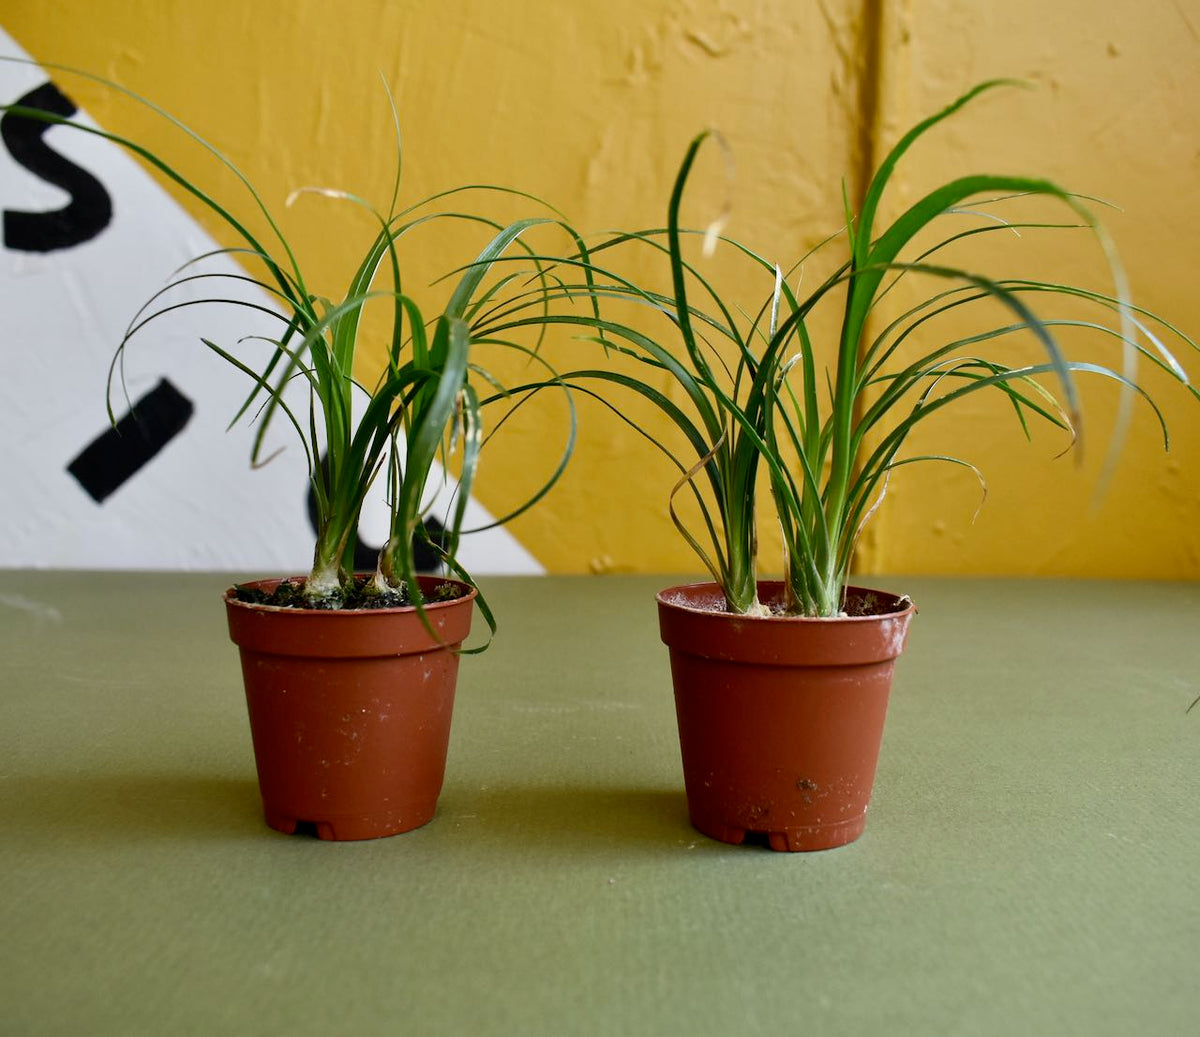 Two small ponytail palm house plants in brown plastic grow pots in front of a black, white, and gold painted background.